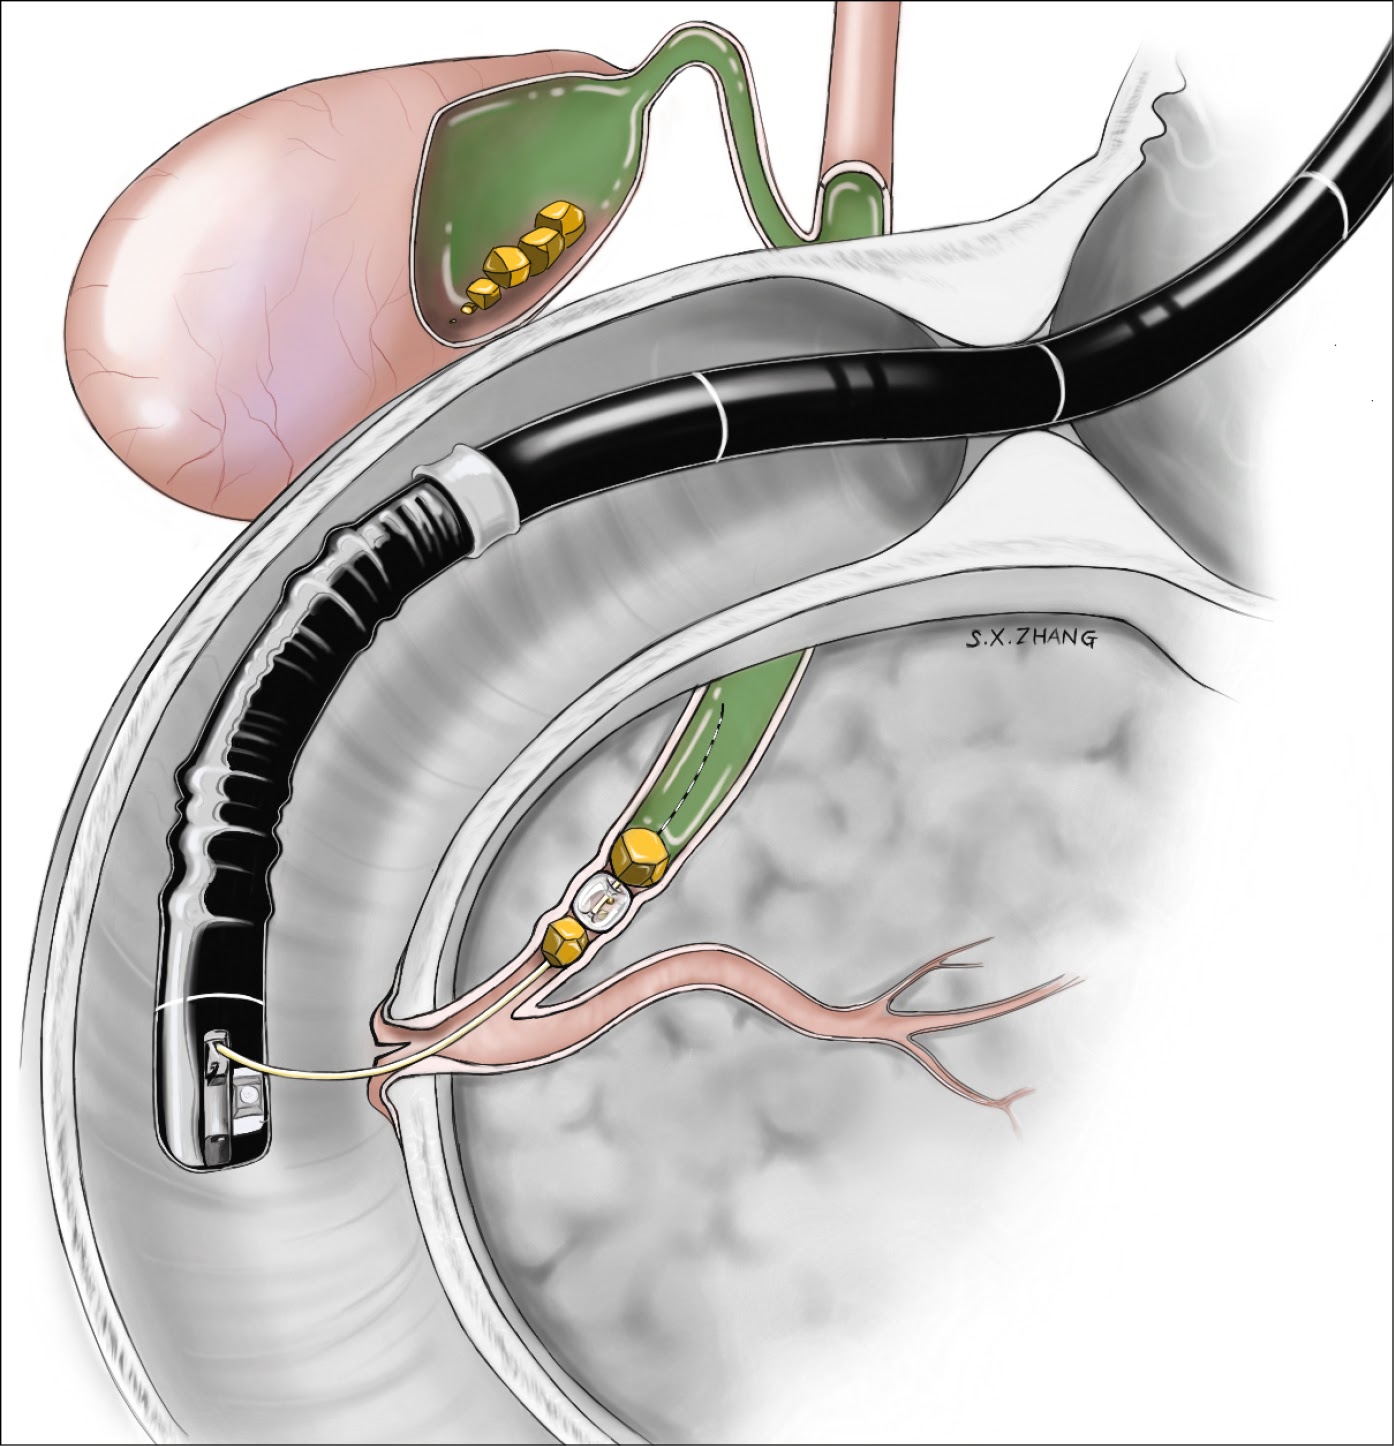 Know all about ERCP Endoscopic Retrograde CholangioPancreatography